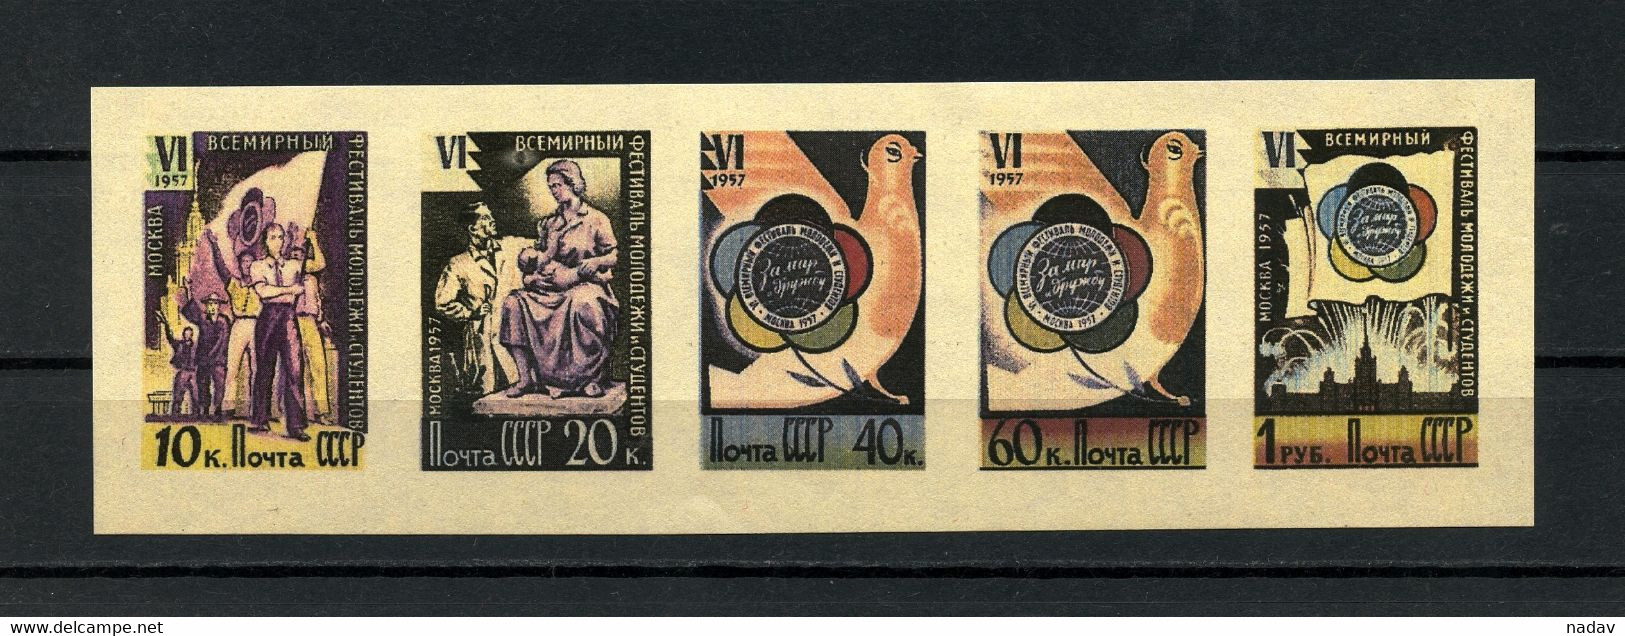 Russia & USSR-1957-  Imperforate, Reproduction - MNH** - Proeven & Herdrukken